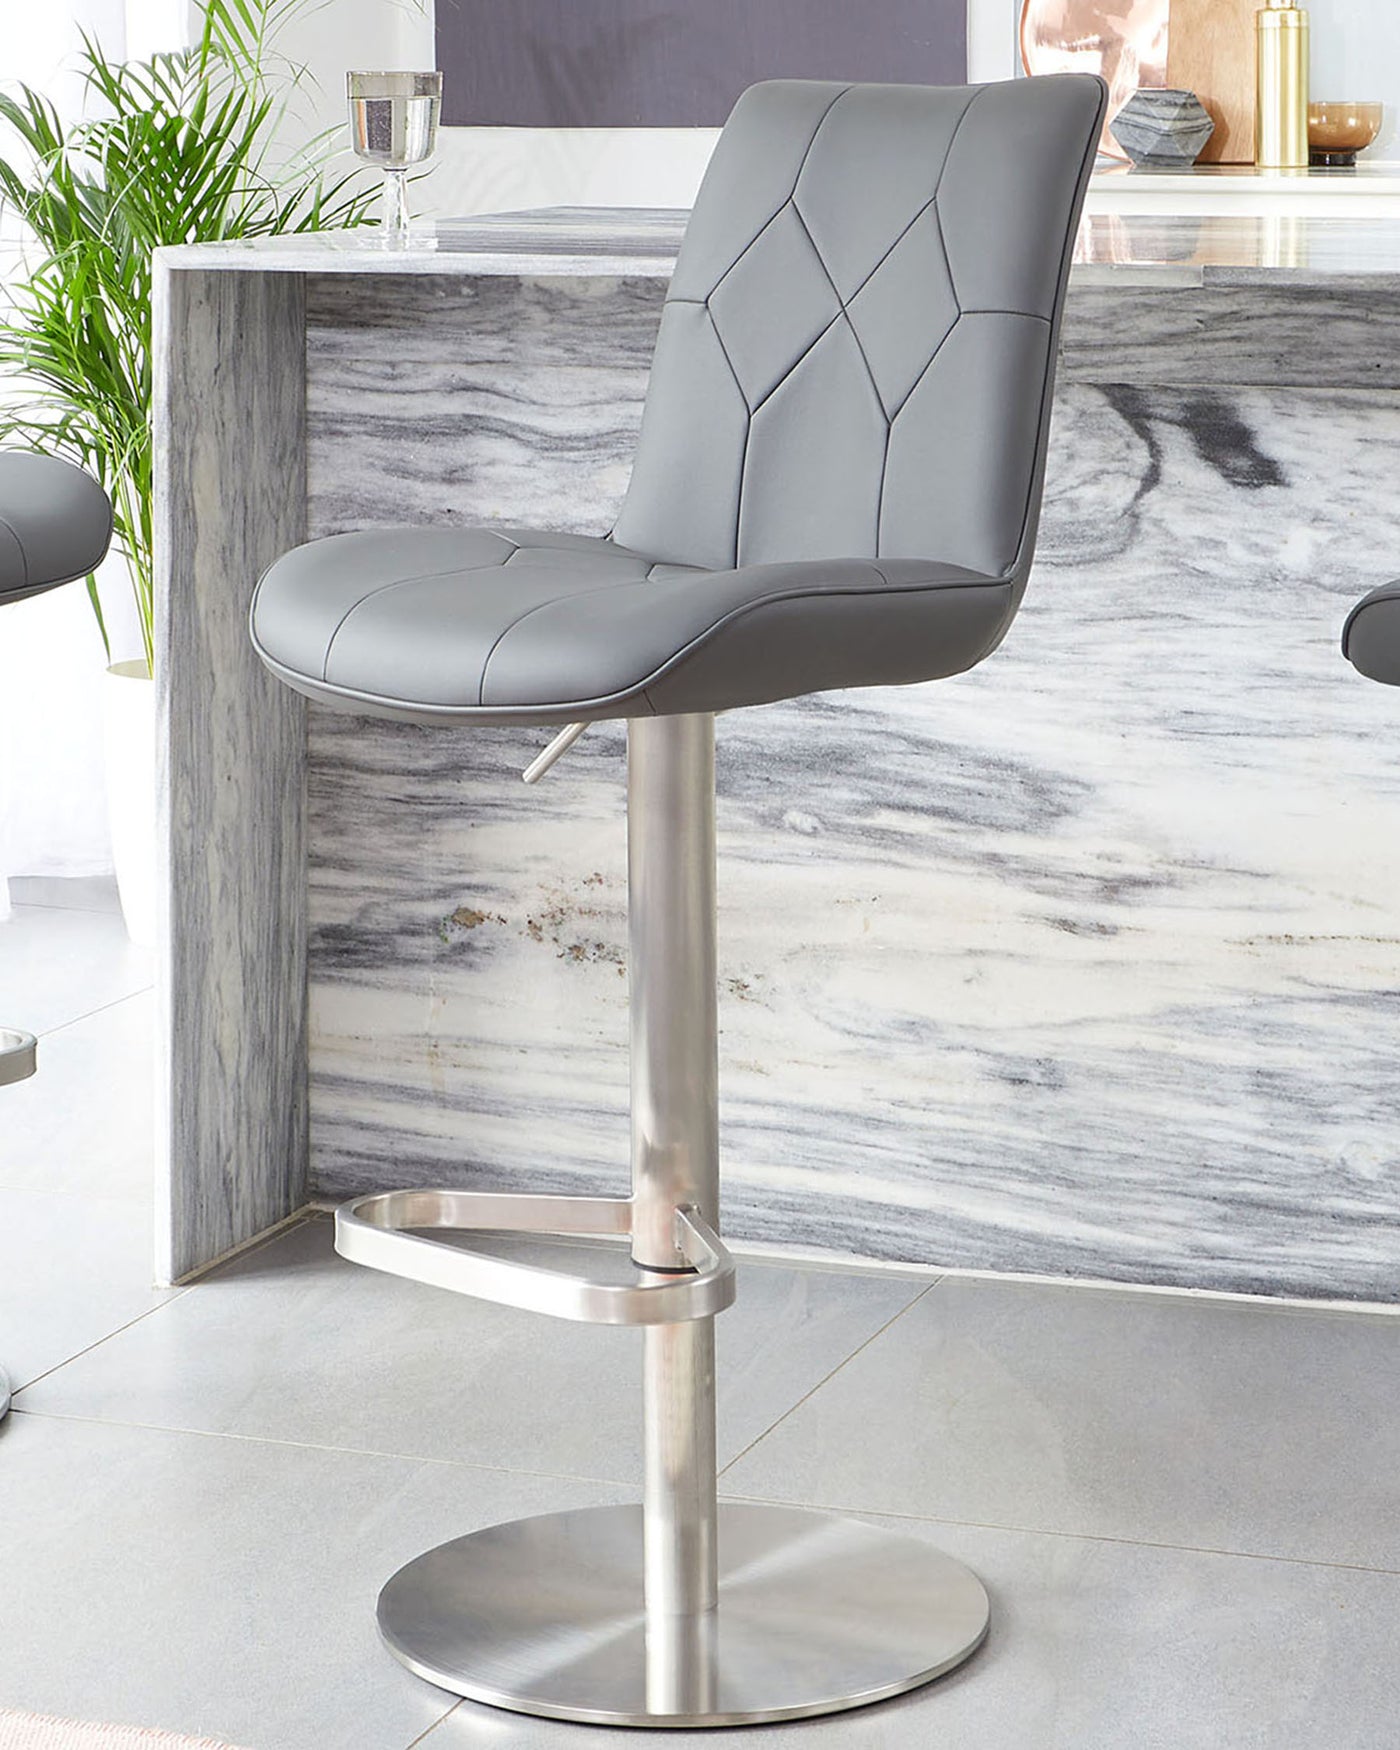 Modern grey faux leather bar stool with a tufted backrest design, chrome pedestal base, and built-in footrest.